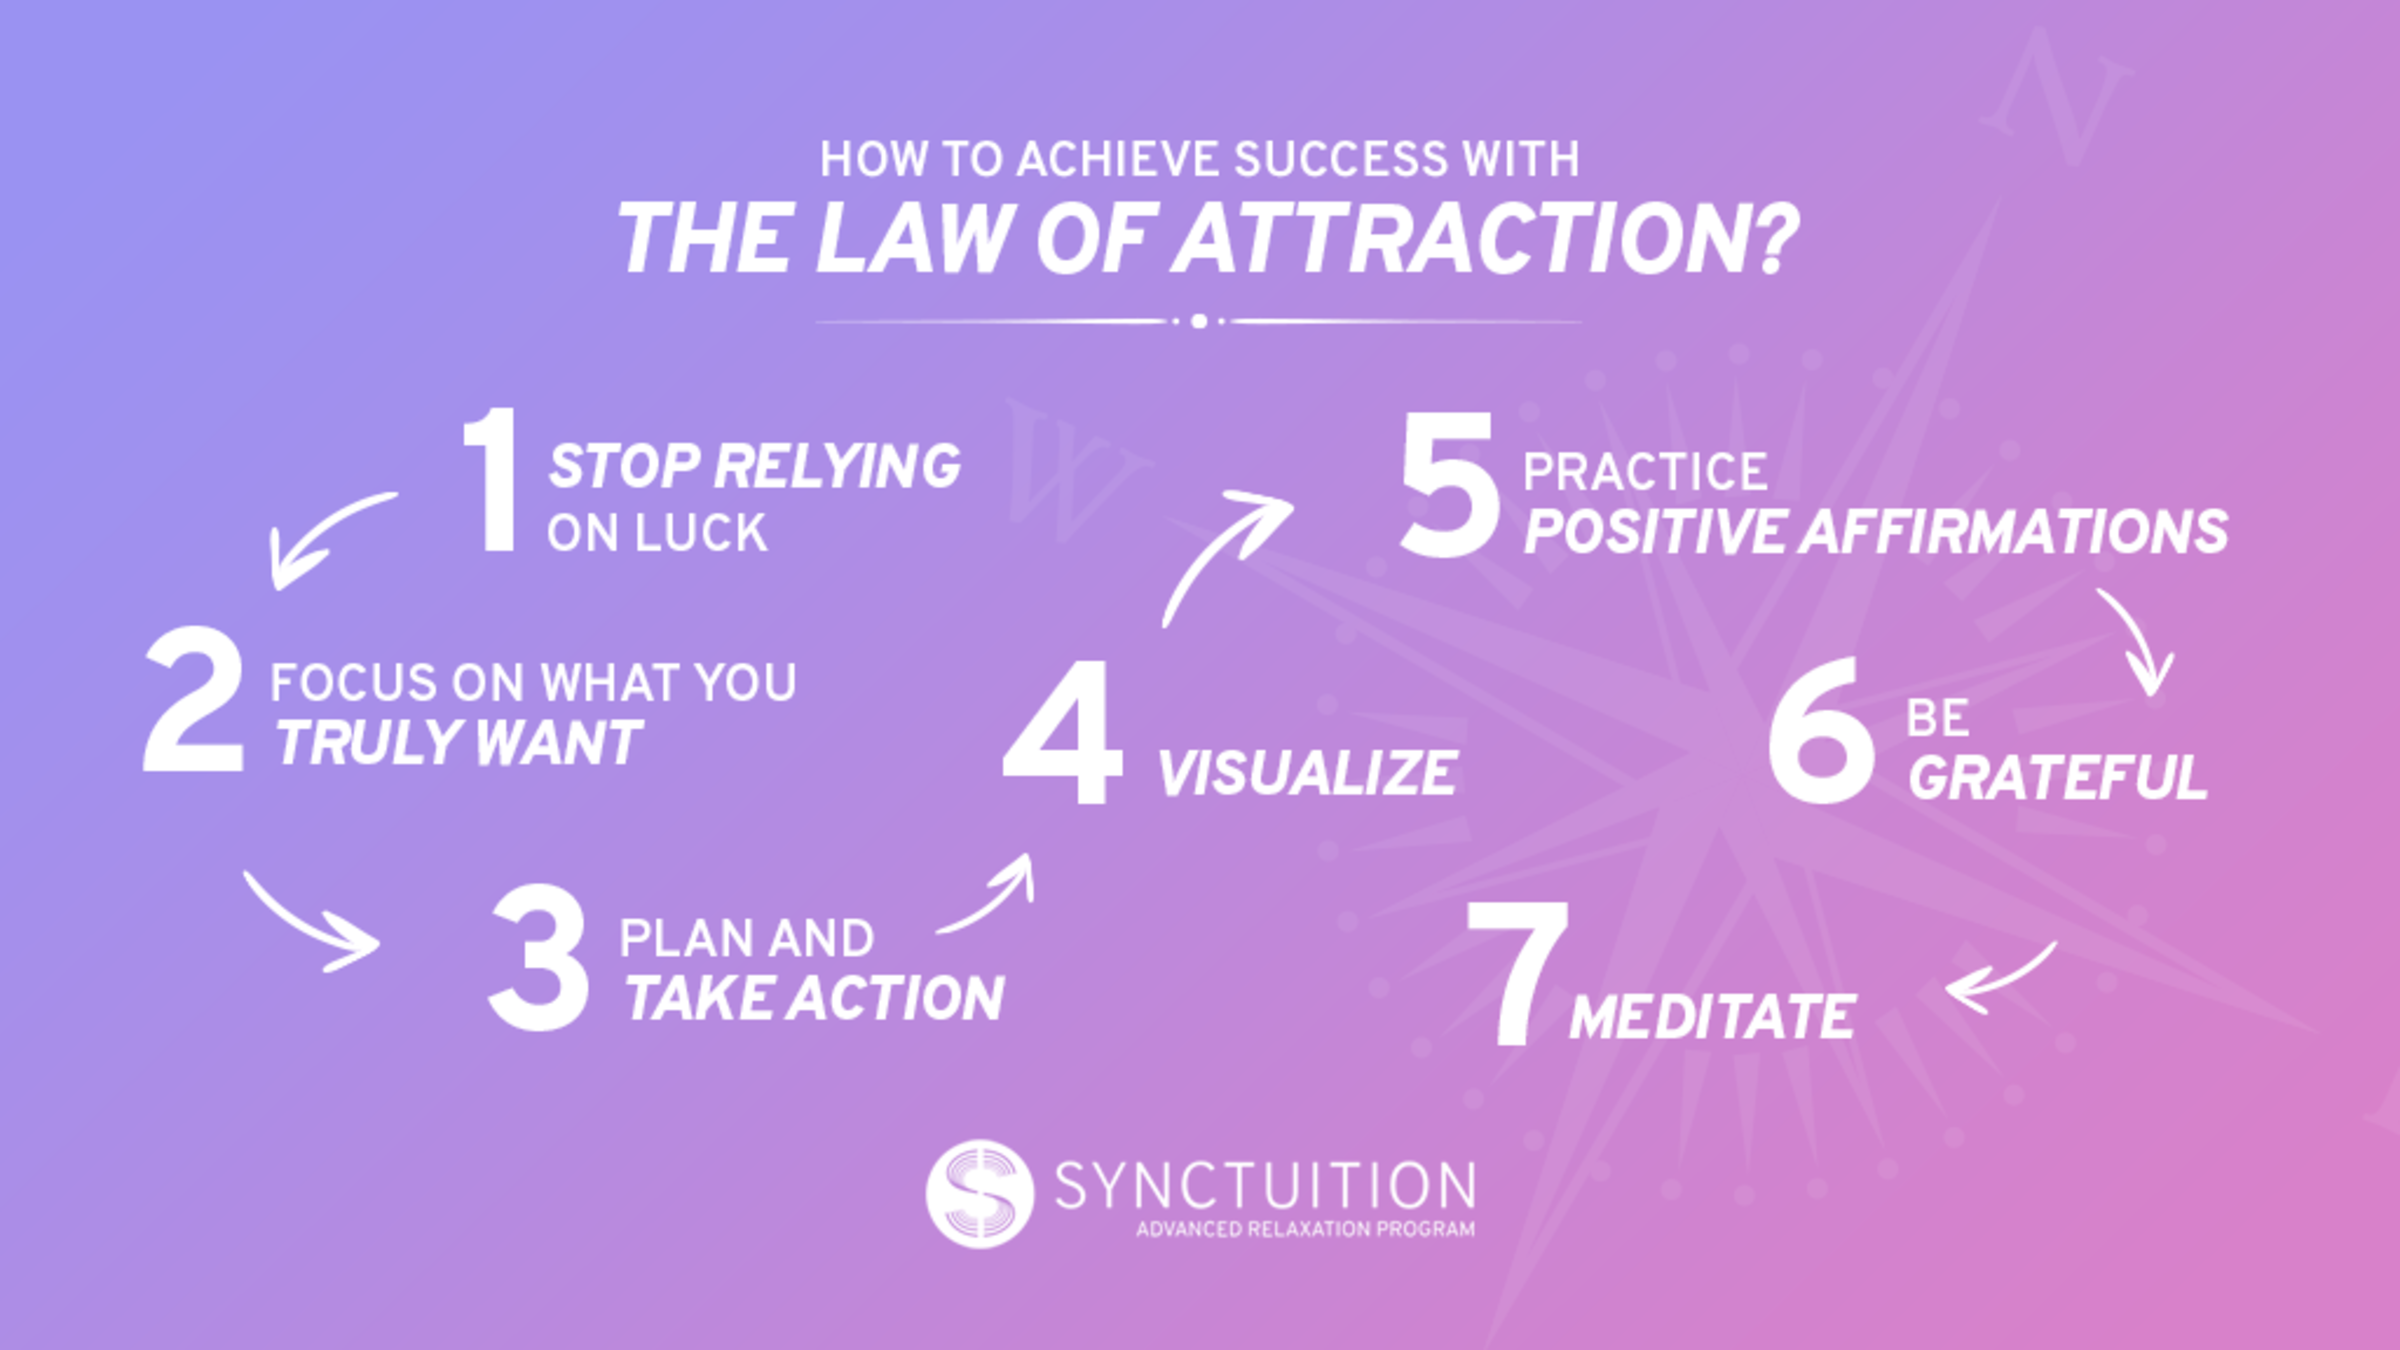 How to Make the Law of Attraction Work For You